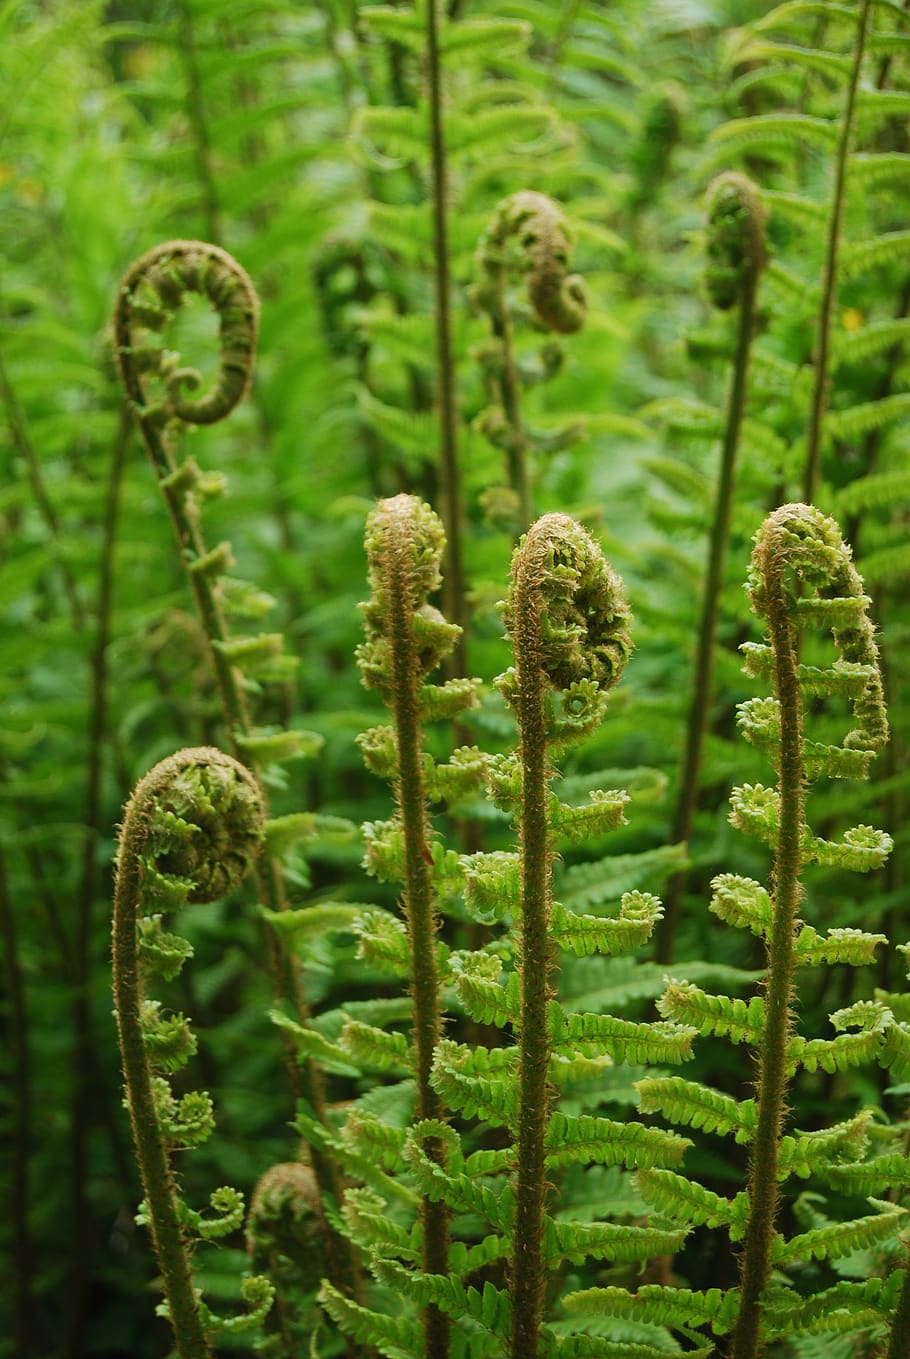 ferns, spirals, plants, spiral, nature, green, plant, growth, green color, beauty in nature